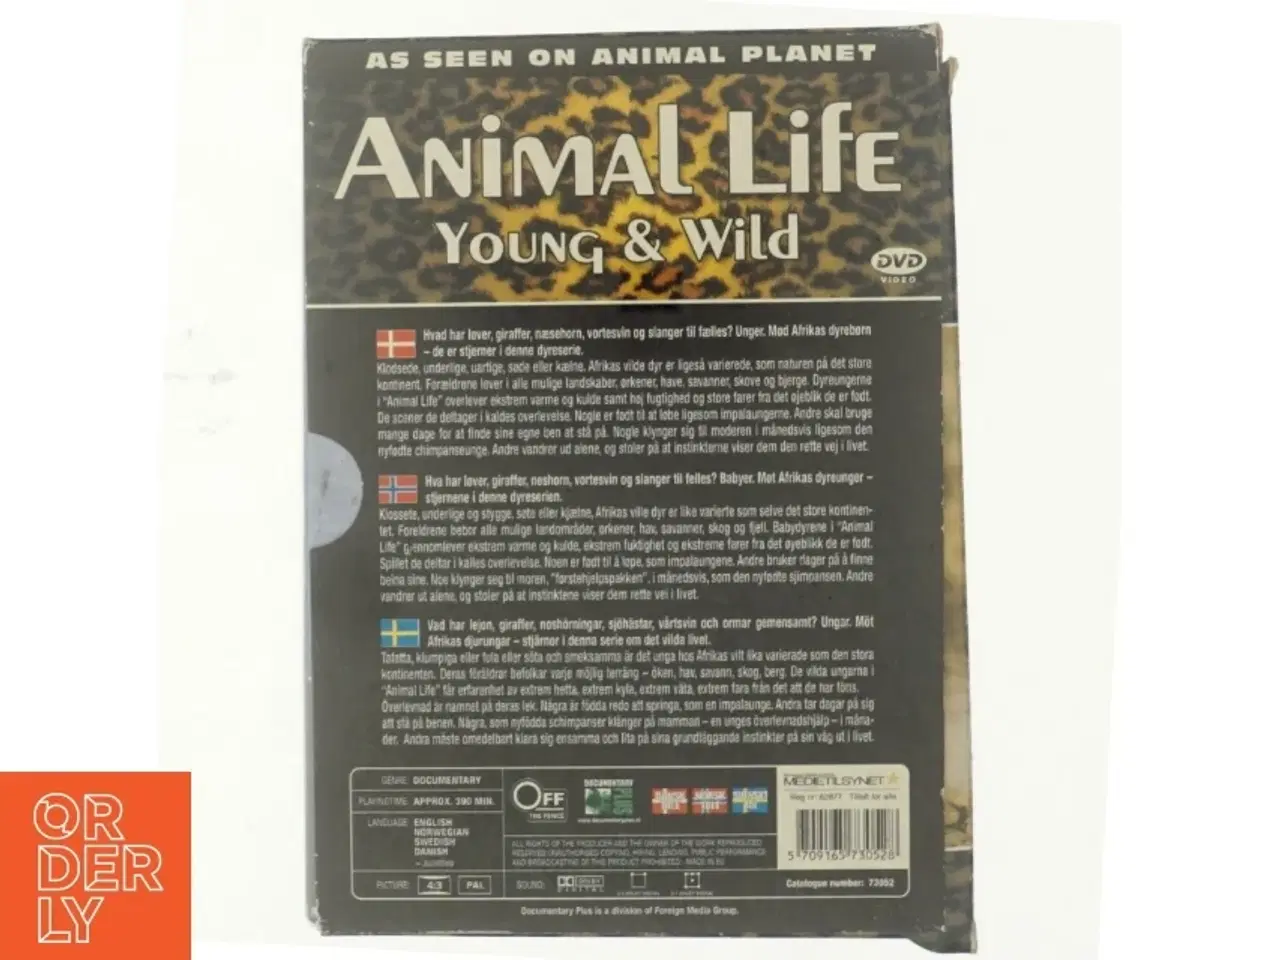 Billede 3 - Animal life, young and wild DVD